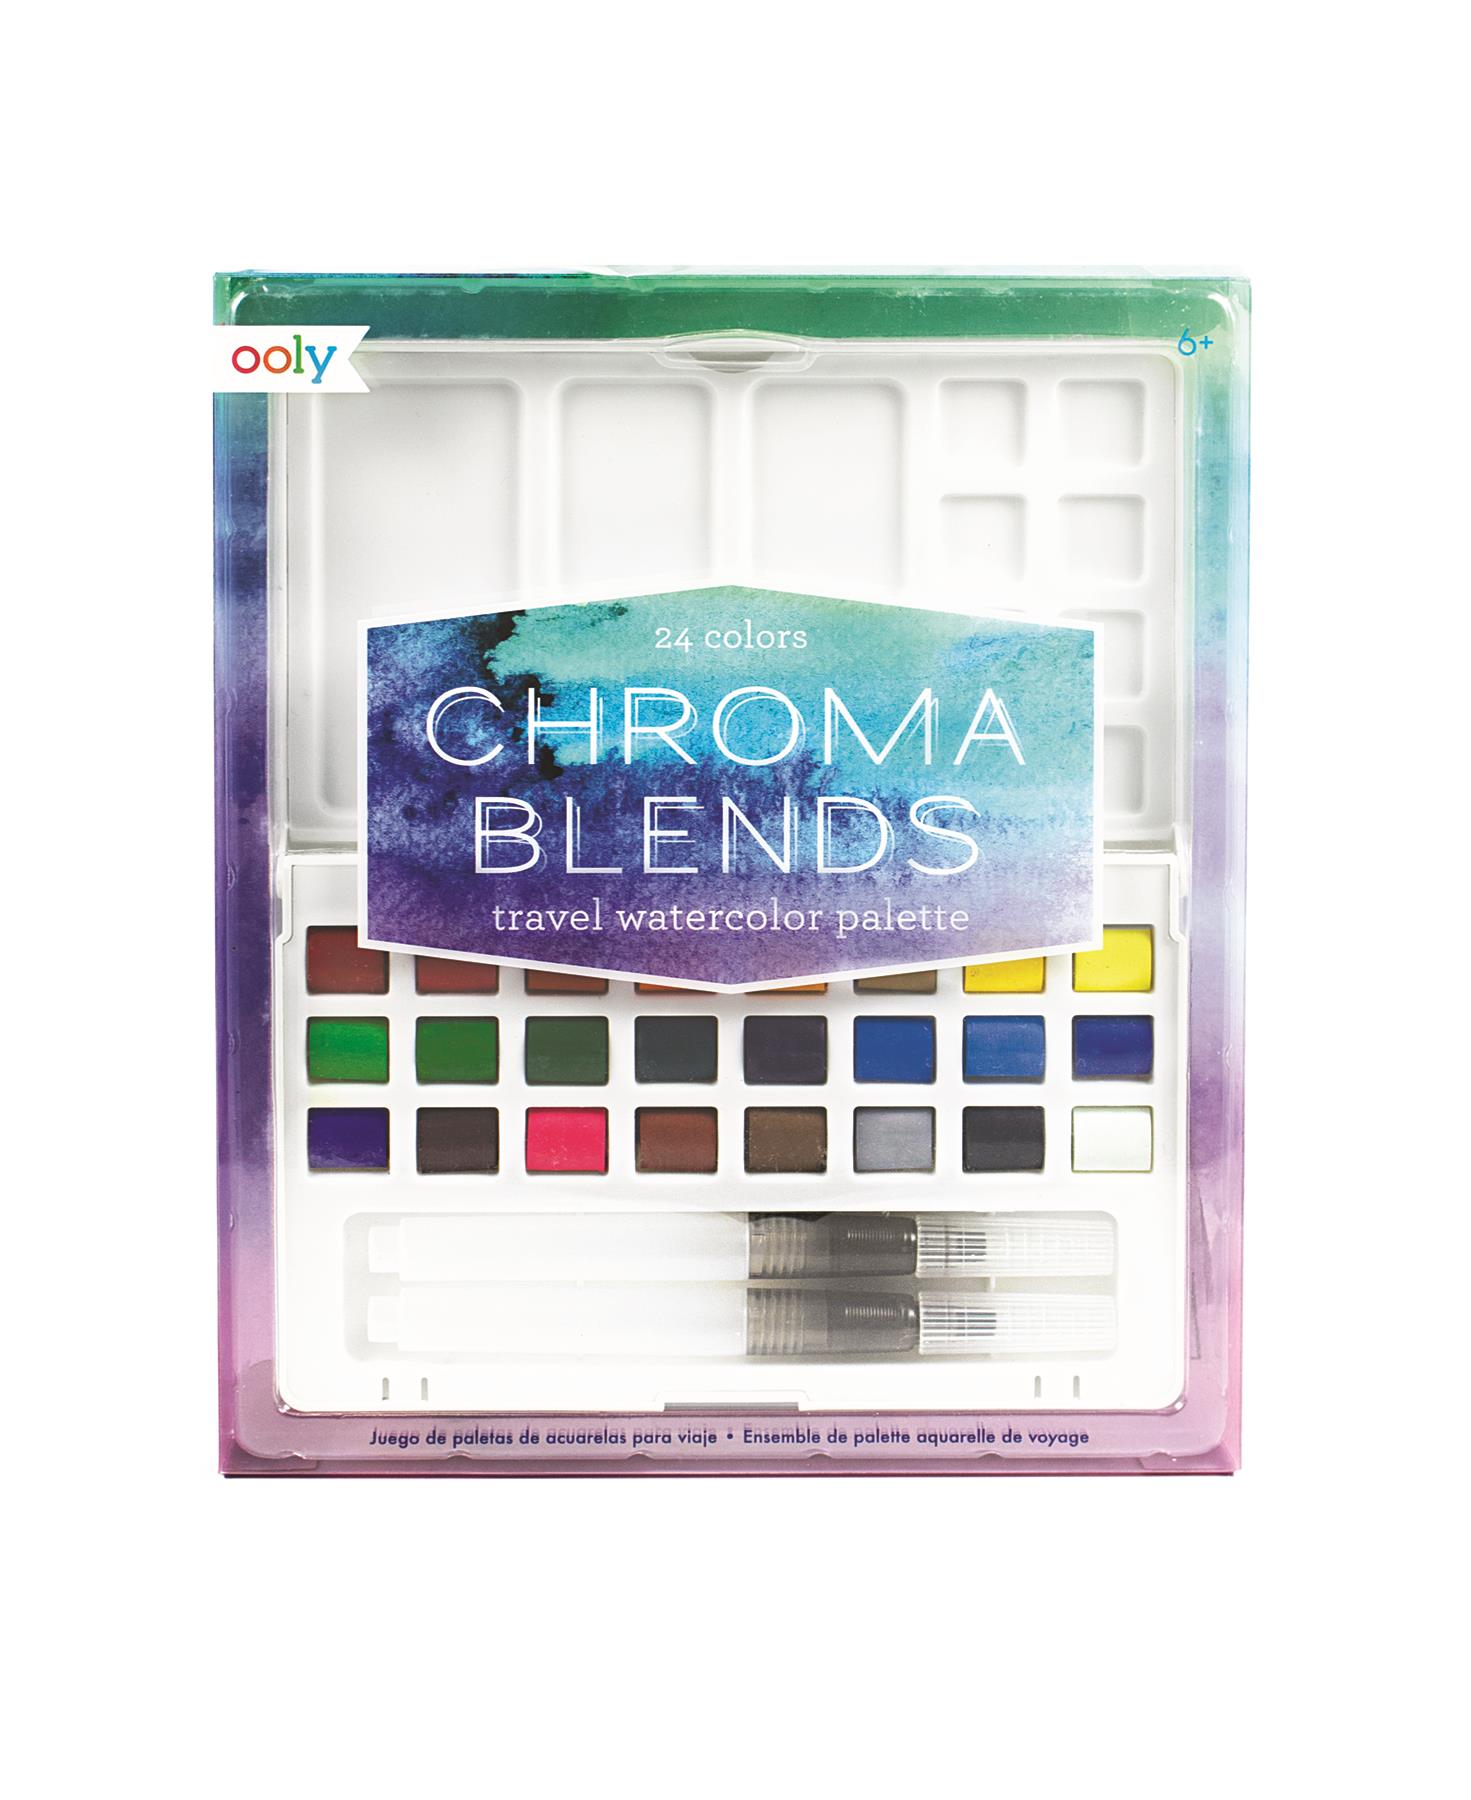 Ooly Chroma Blends Travel Watercolor Palette